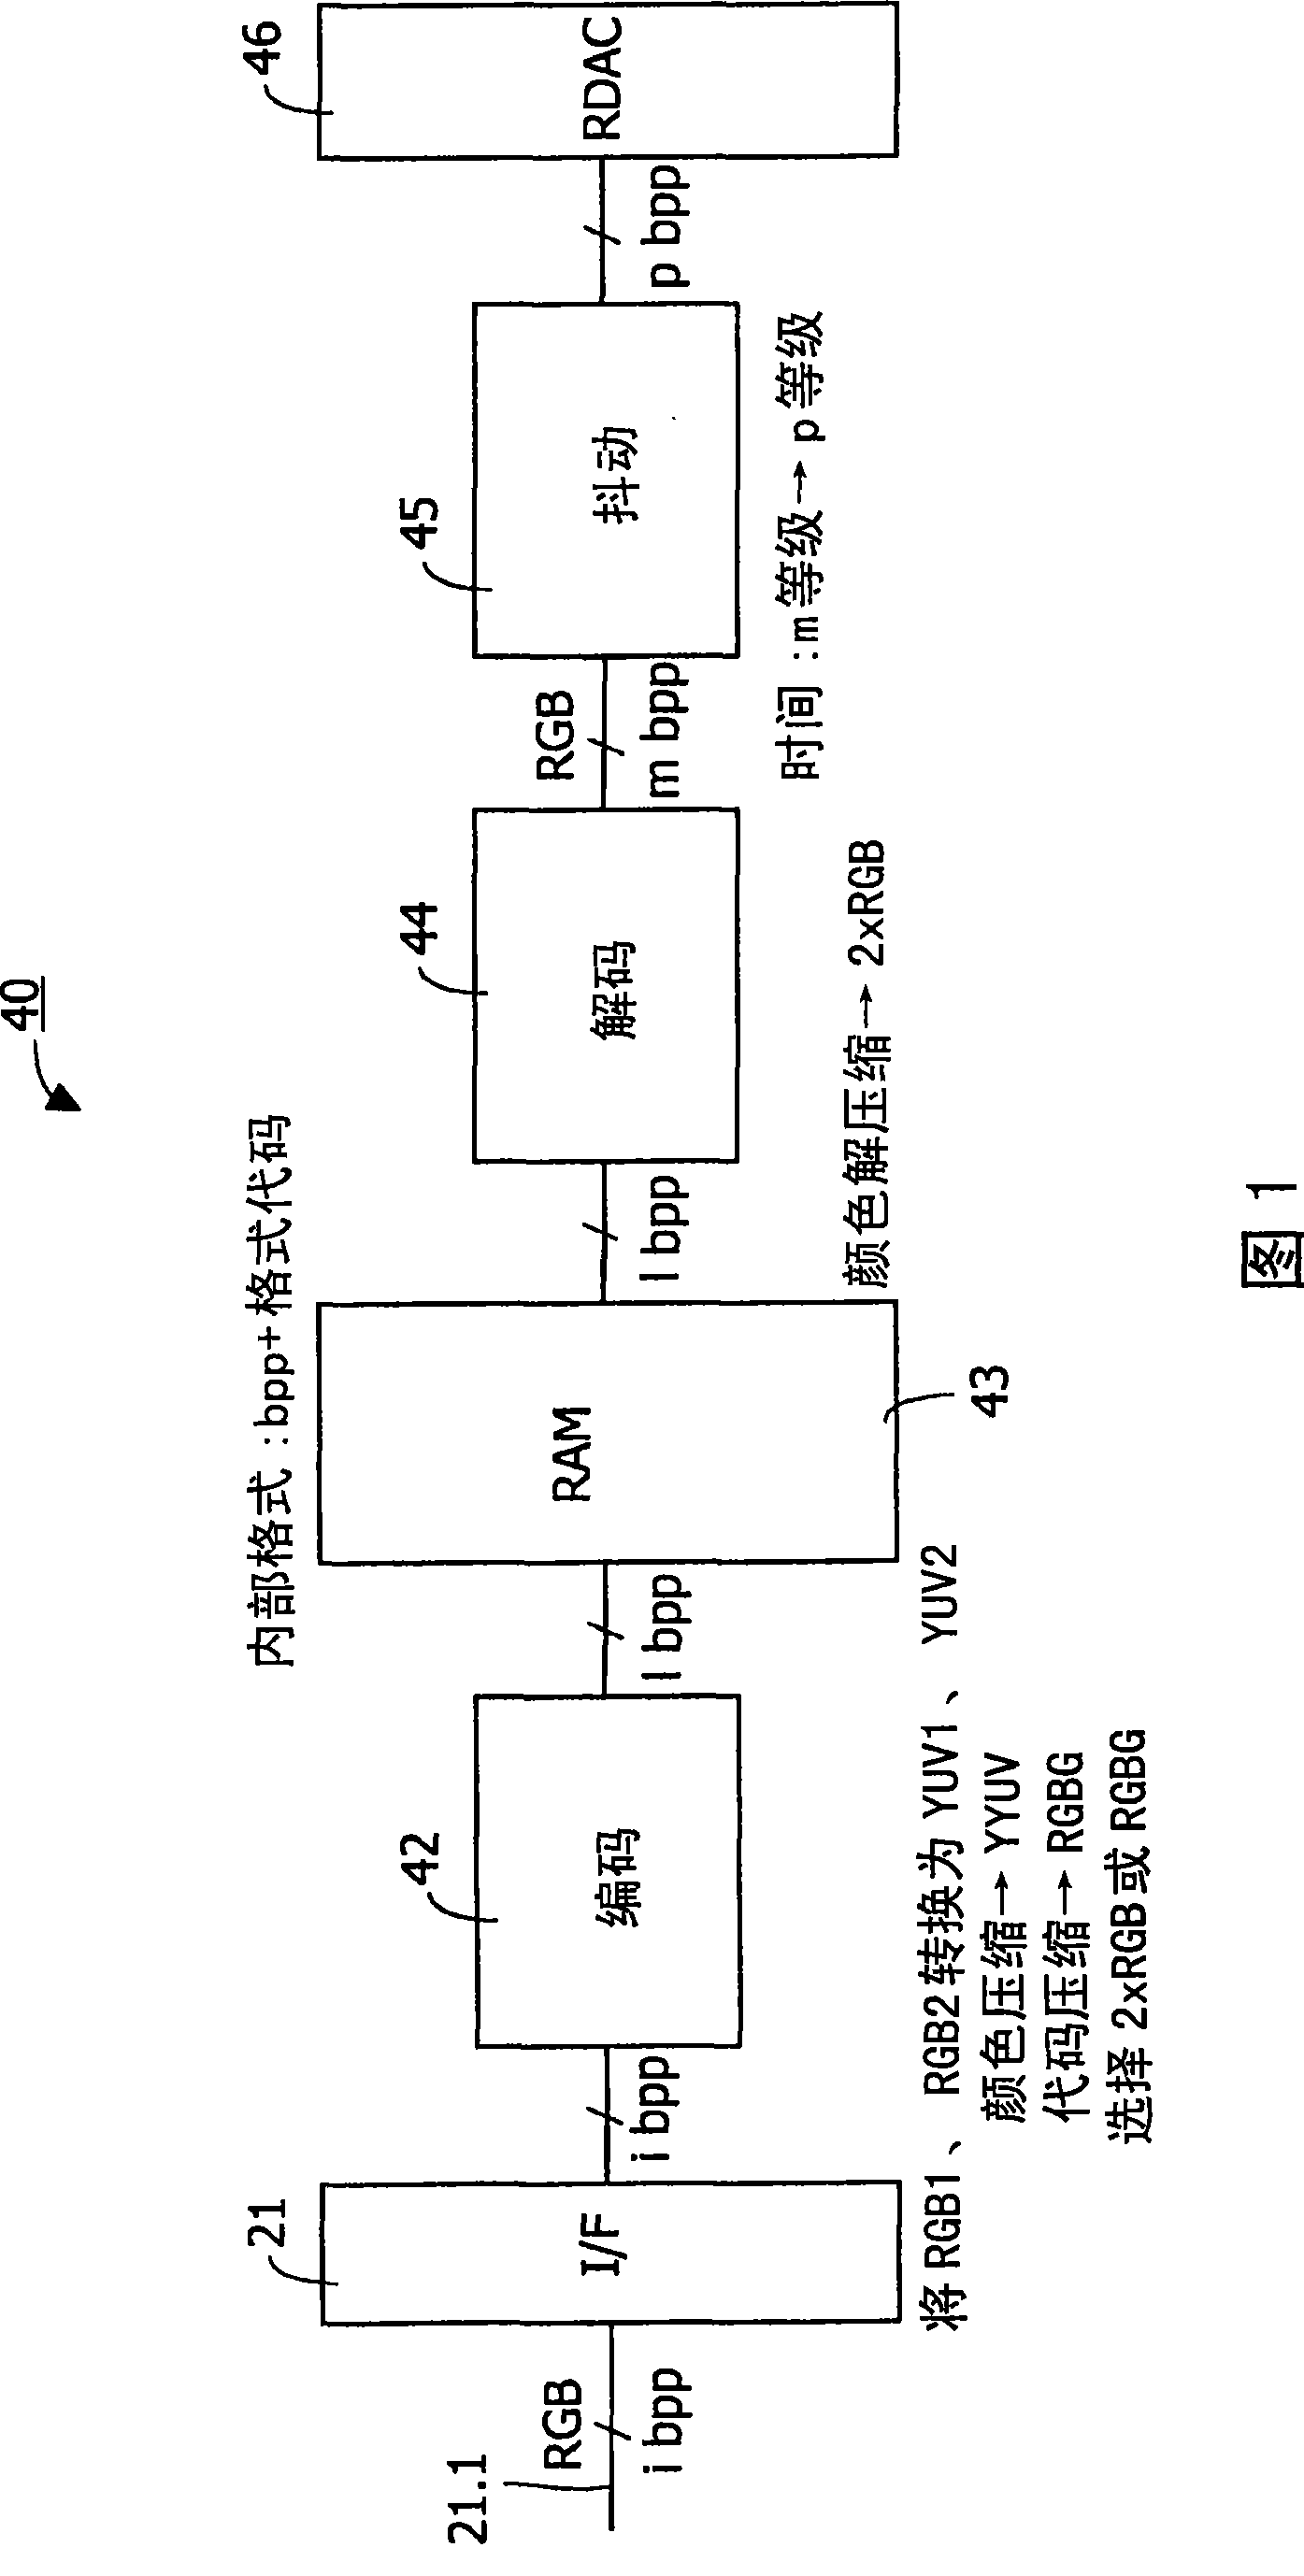 New compression format and apparatus using the new compression format for temporarily storing image data in a frame memory